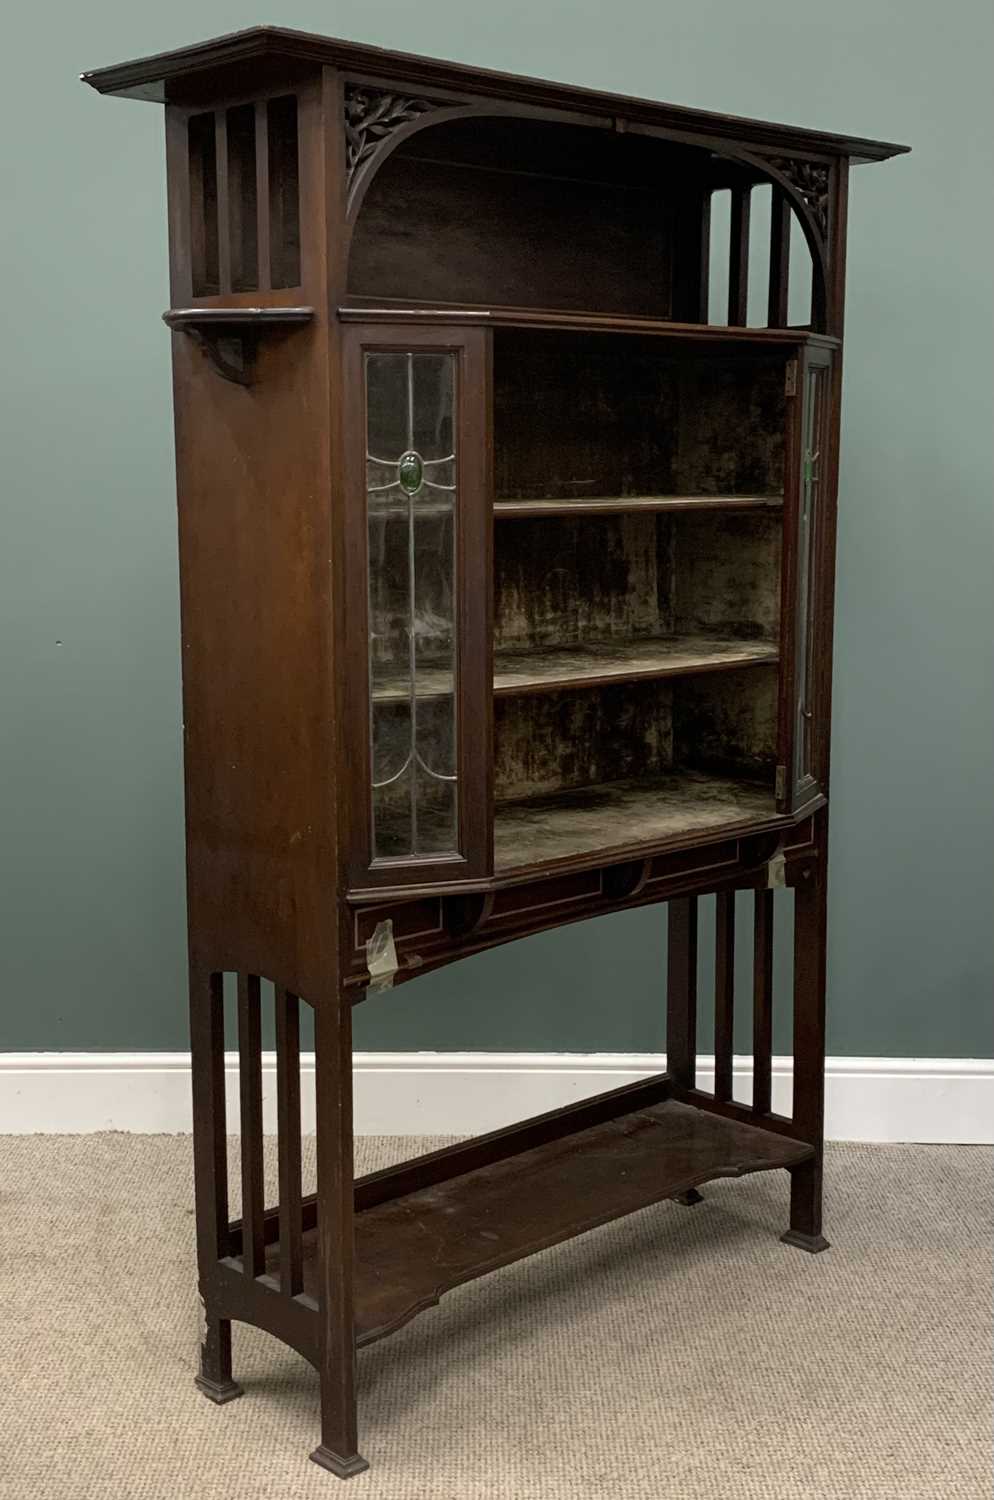 EDWARDIAN MAHOGANY CHINA CABINET with Arts & Crafts features and leaded glass panels, 183 (h) x - Image 4 of 4